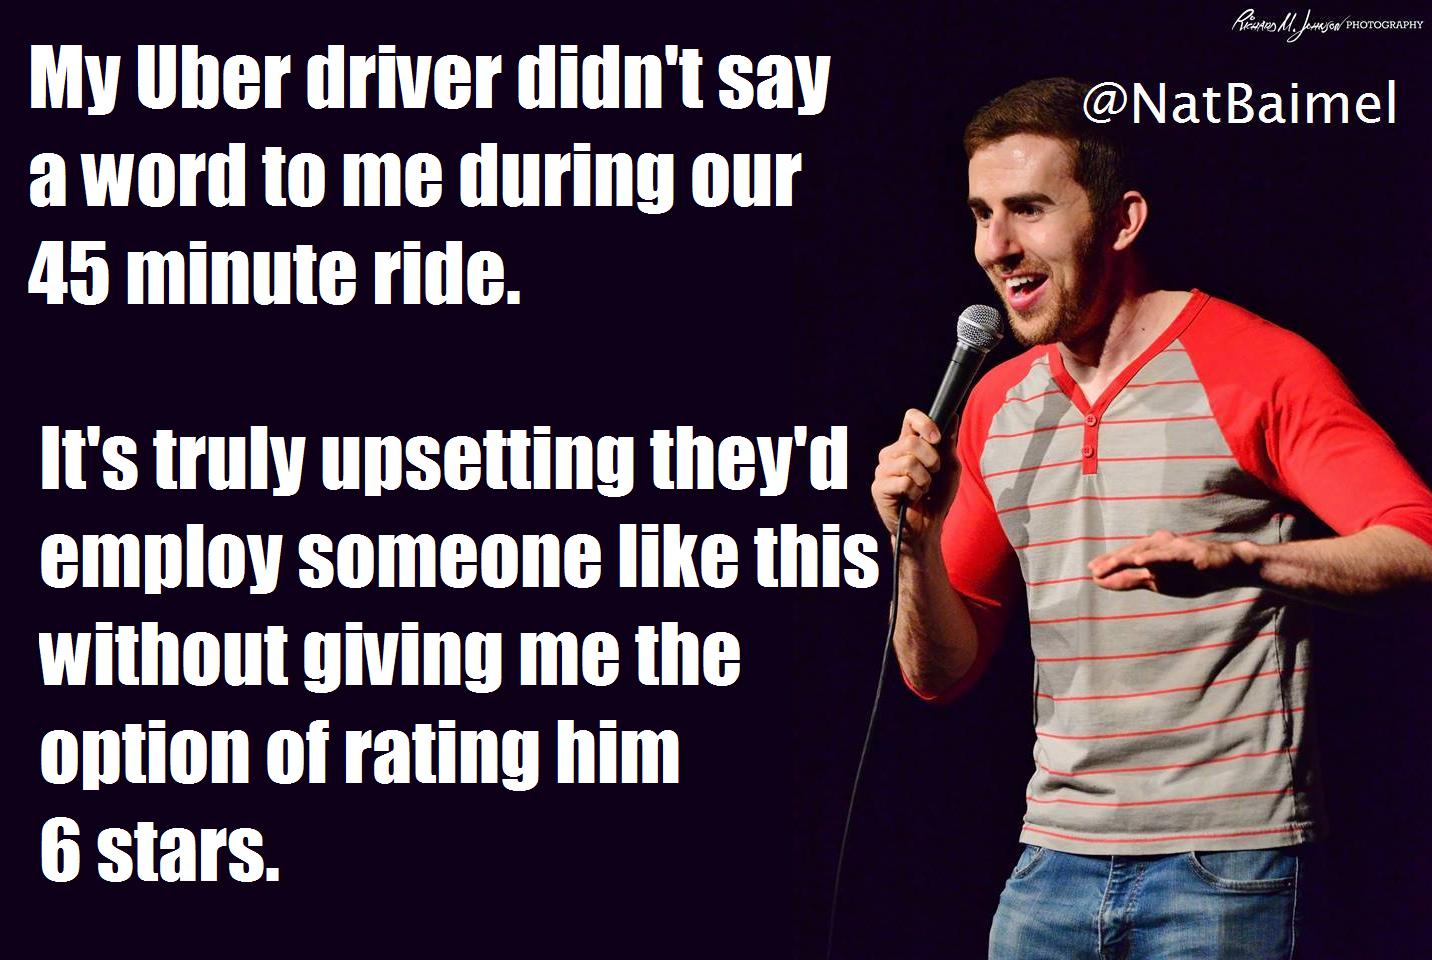 standup shots - My Uber driver didn't say a word to me during our 45 minute ride. It's truly upsetting they'd employ someone this without giving me the option of rating him 6 stars.